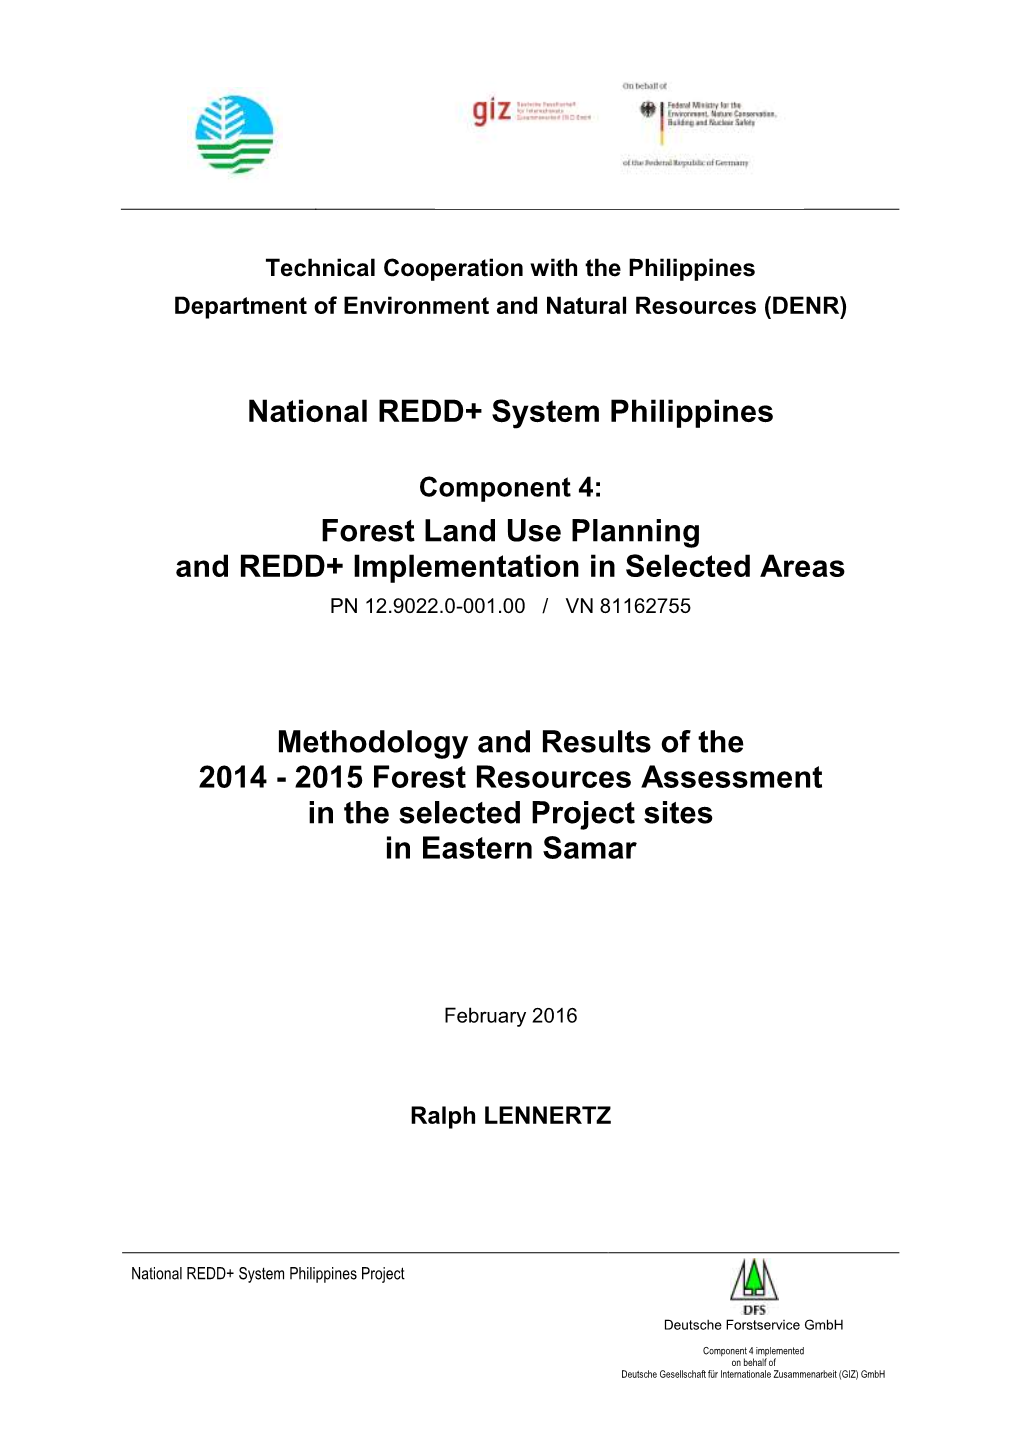 National REDD+ System Philippines Forest Land Use Planning And